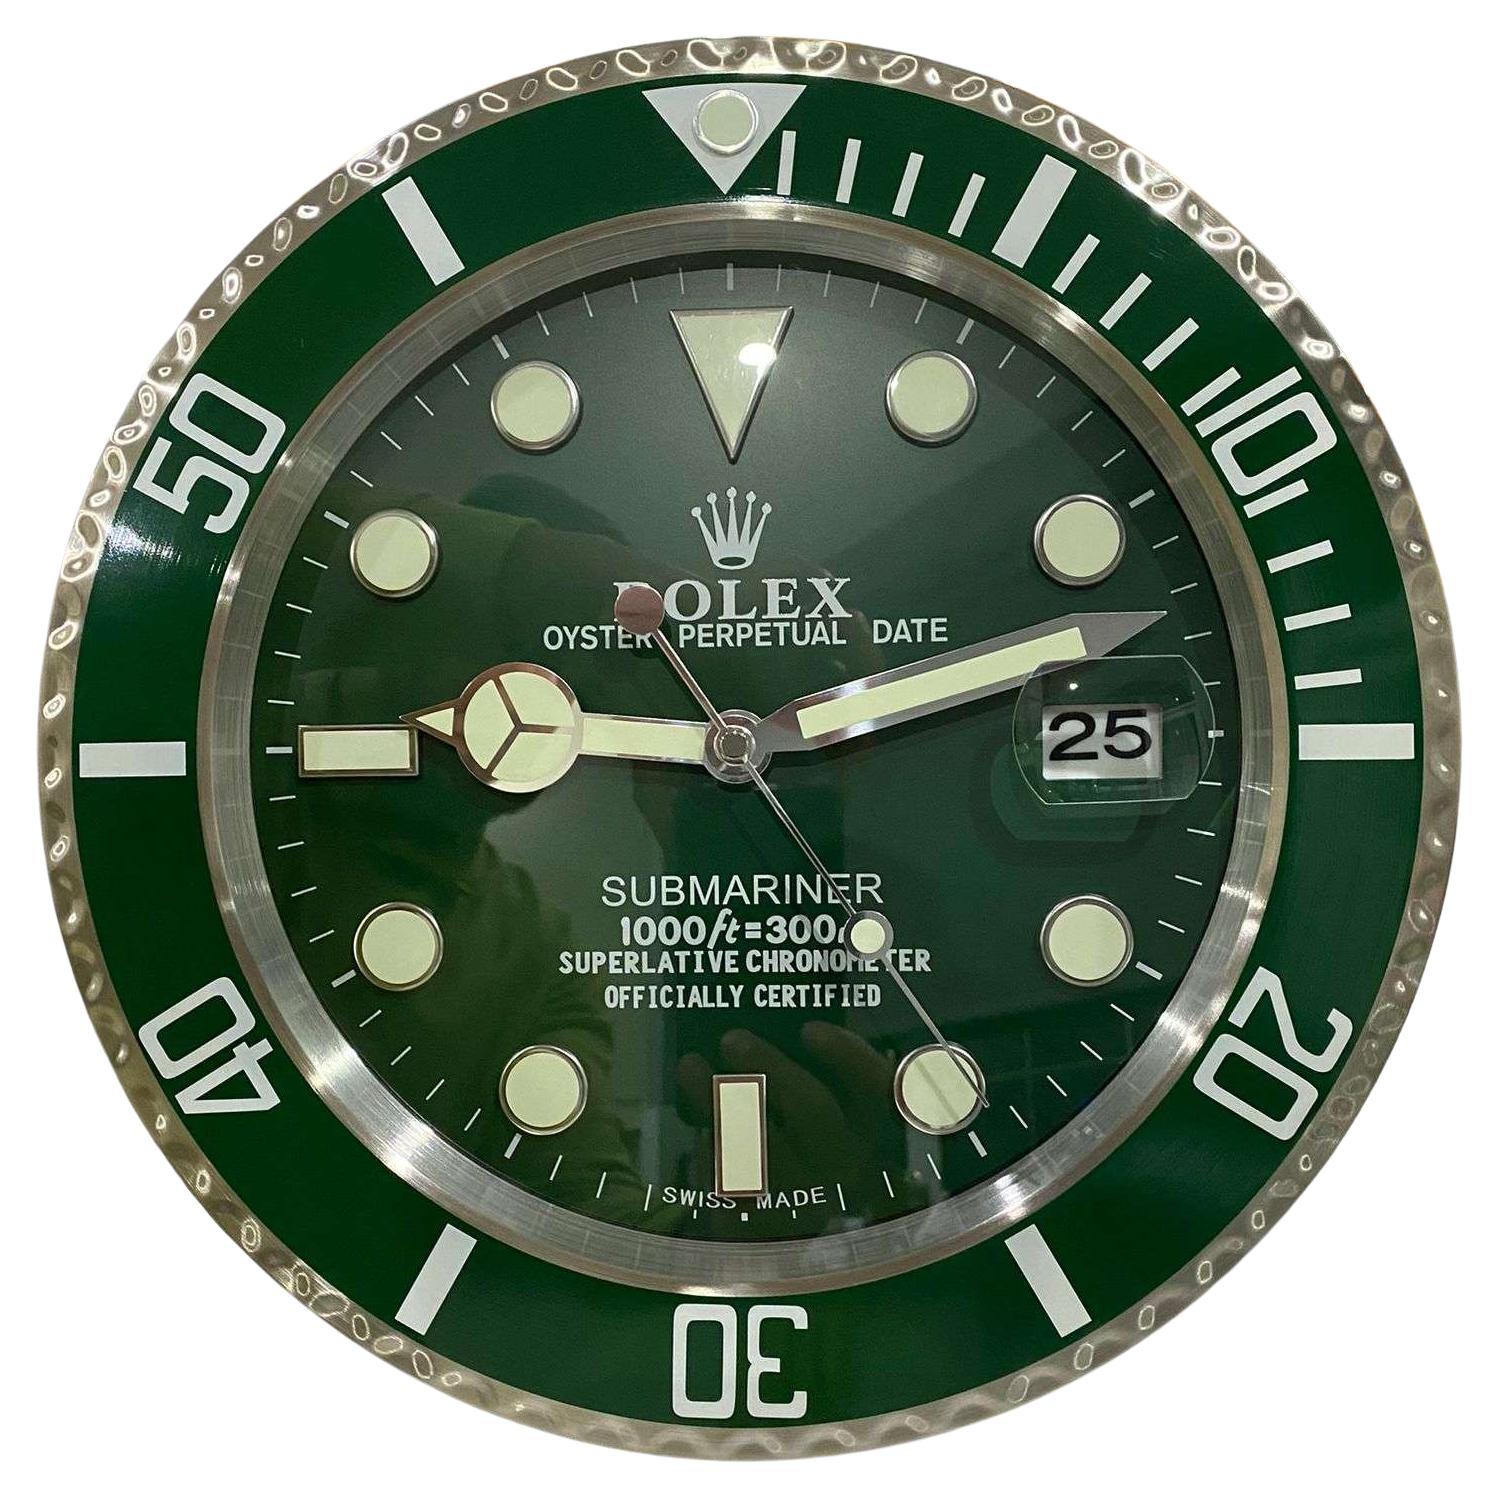 ROLEX Officially Certified Oyster Perpetual Hulk Submariner Luxury Wall Clock 